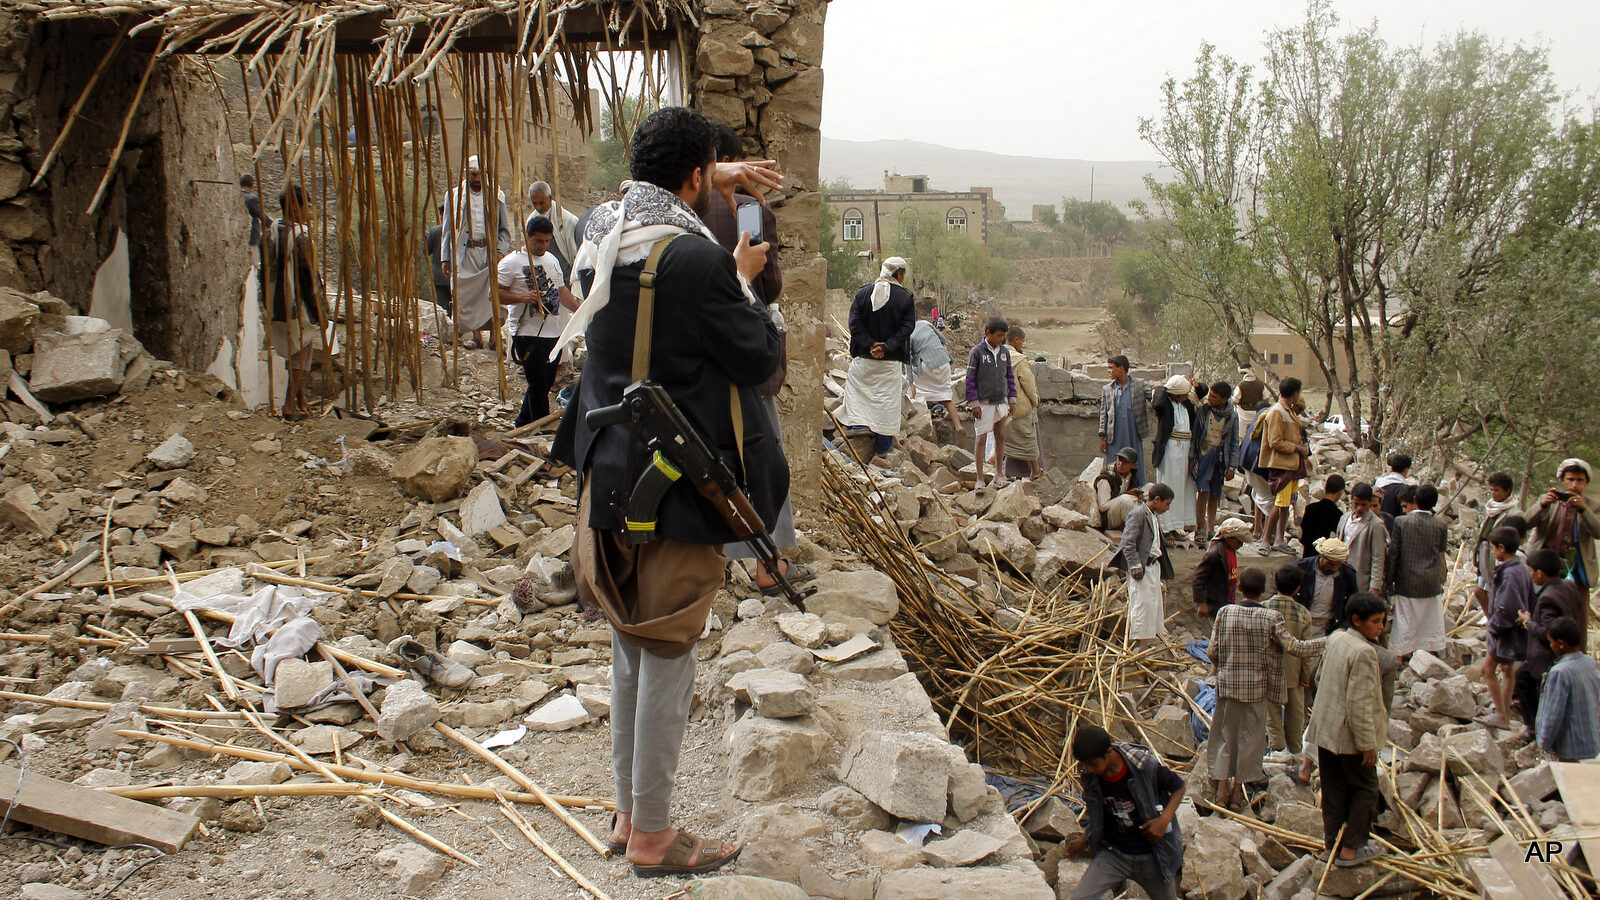 A Yemeni man uses his mobile to take photos of the rubble of houses destroyed by Saudi airstrikes in a village near Sanaa, Yemen, Saturday, April 4, 2015.